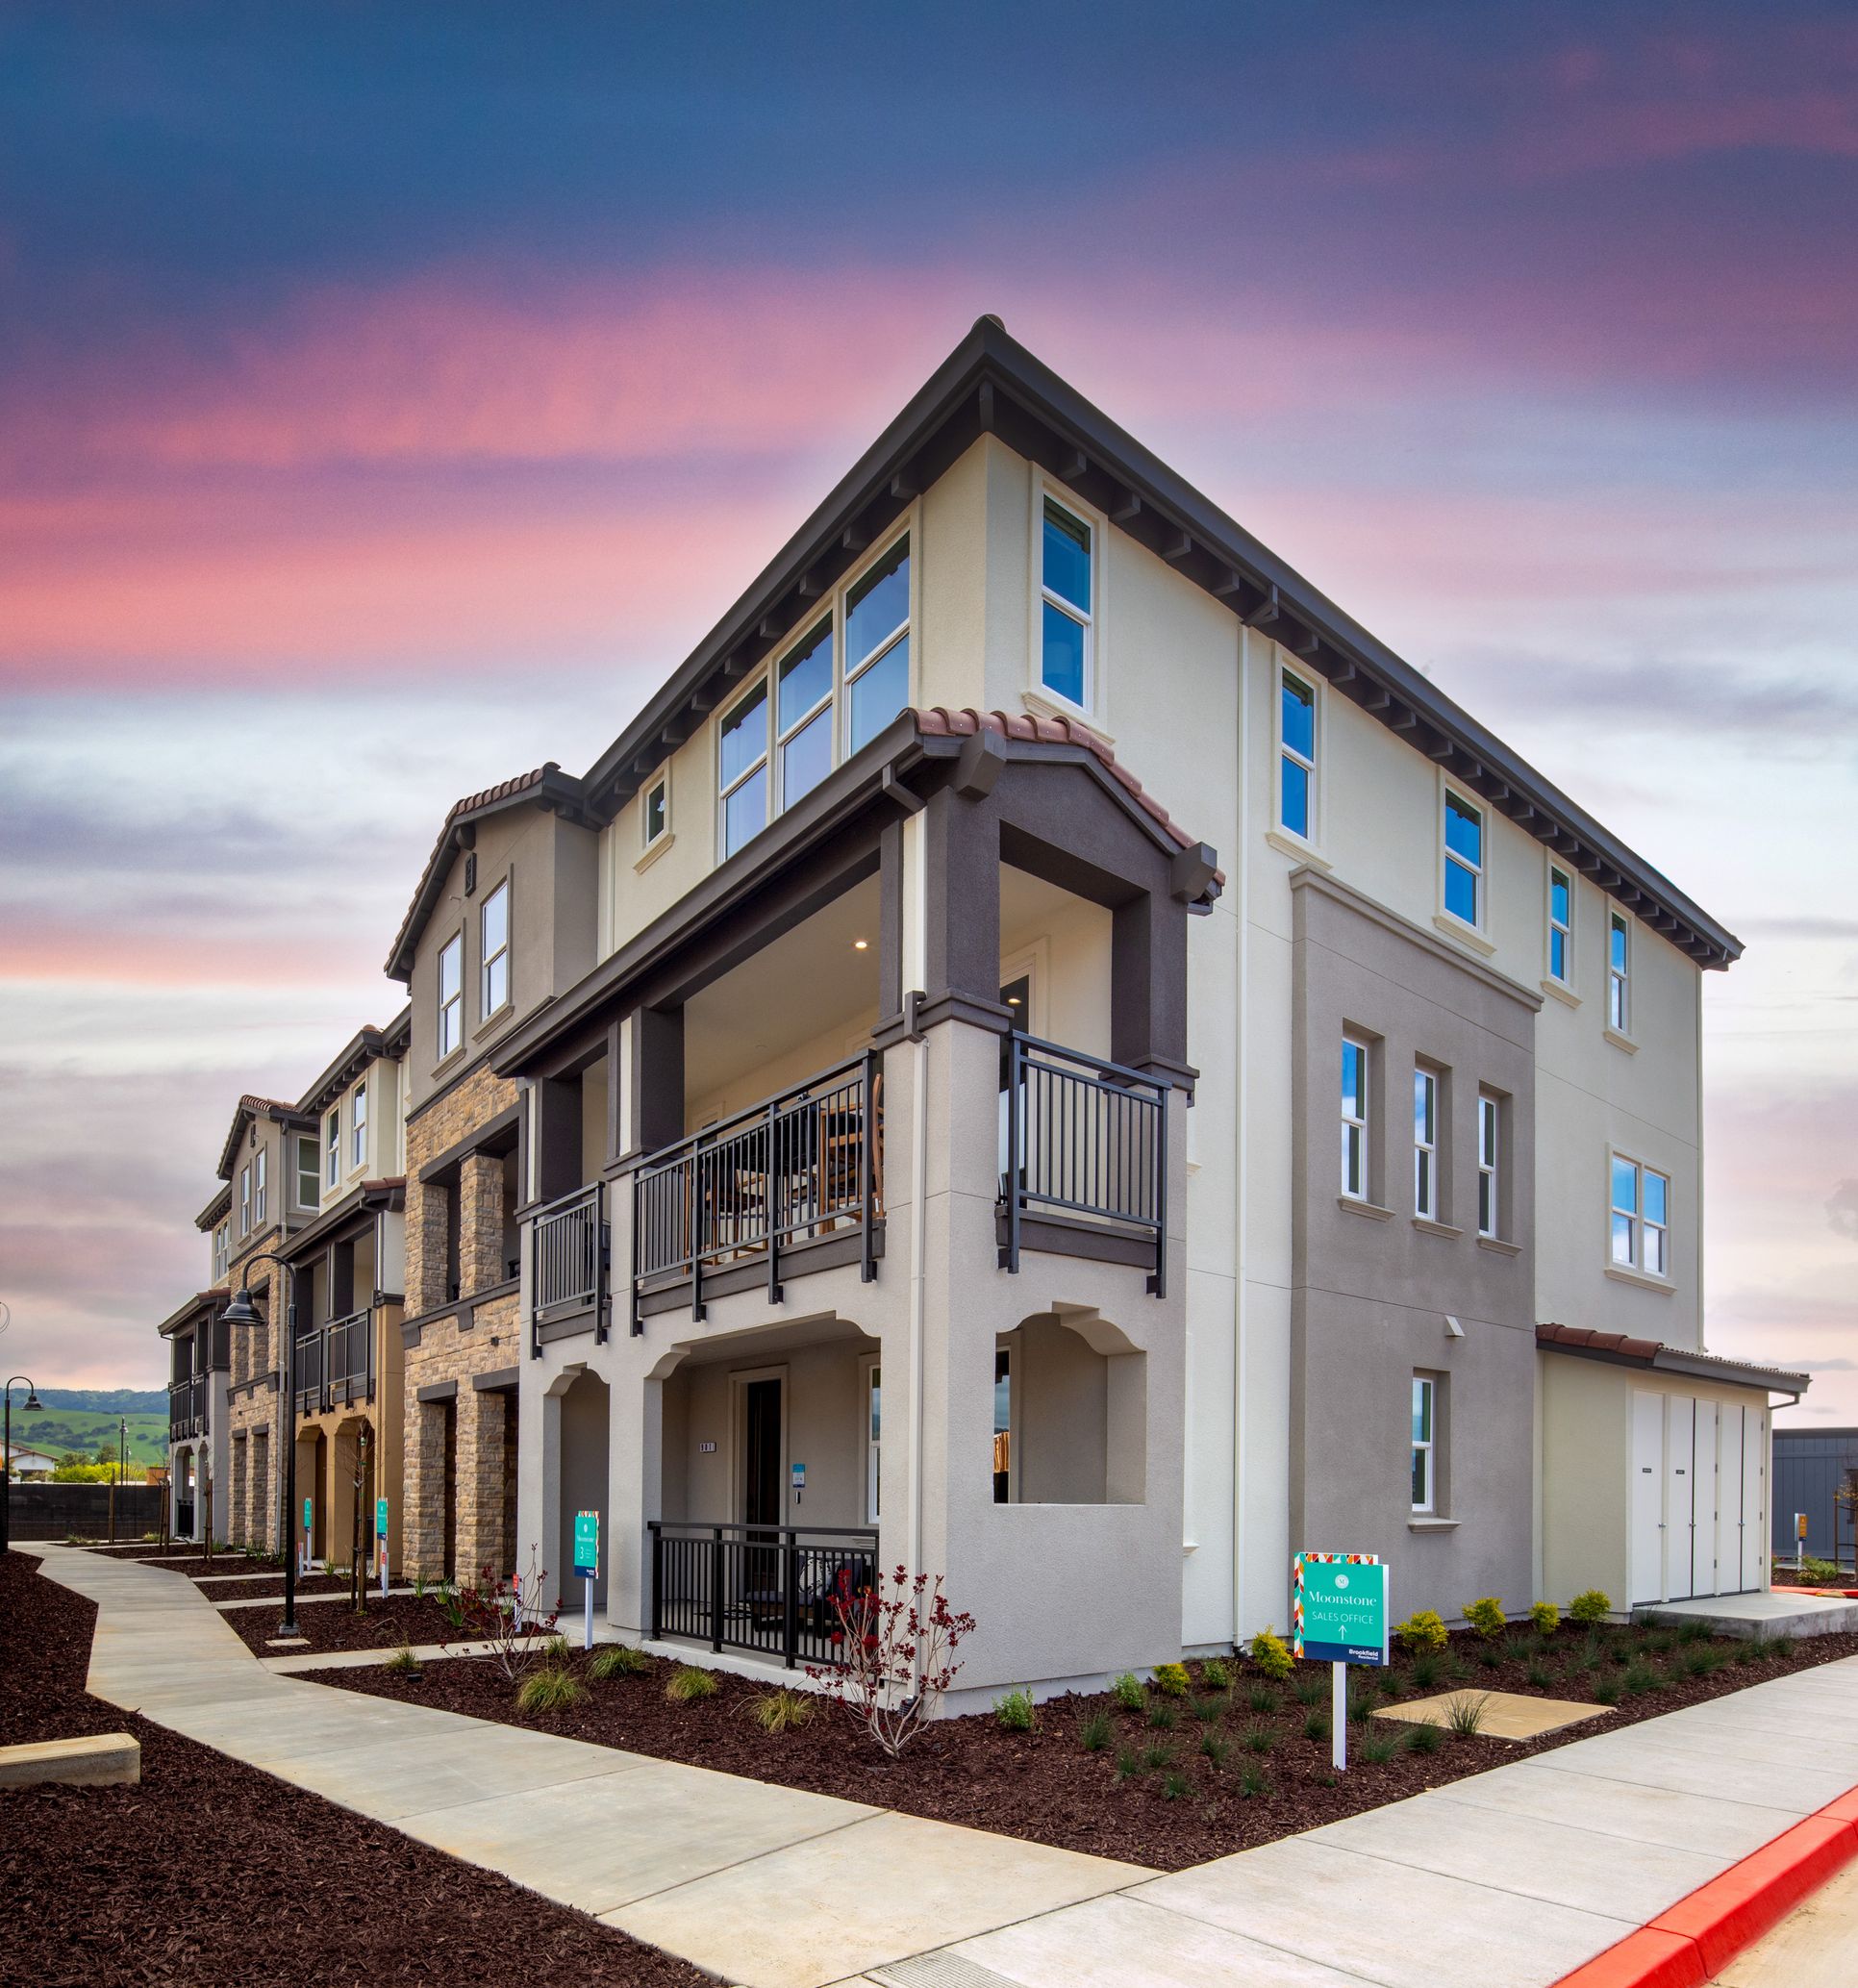 Moonstone Residence 3  Model at Rosewood:Rosewood is bringing charming townhomes to a charismatic location that checks all your boxes.